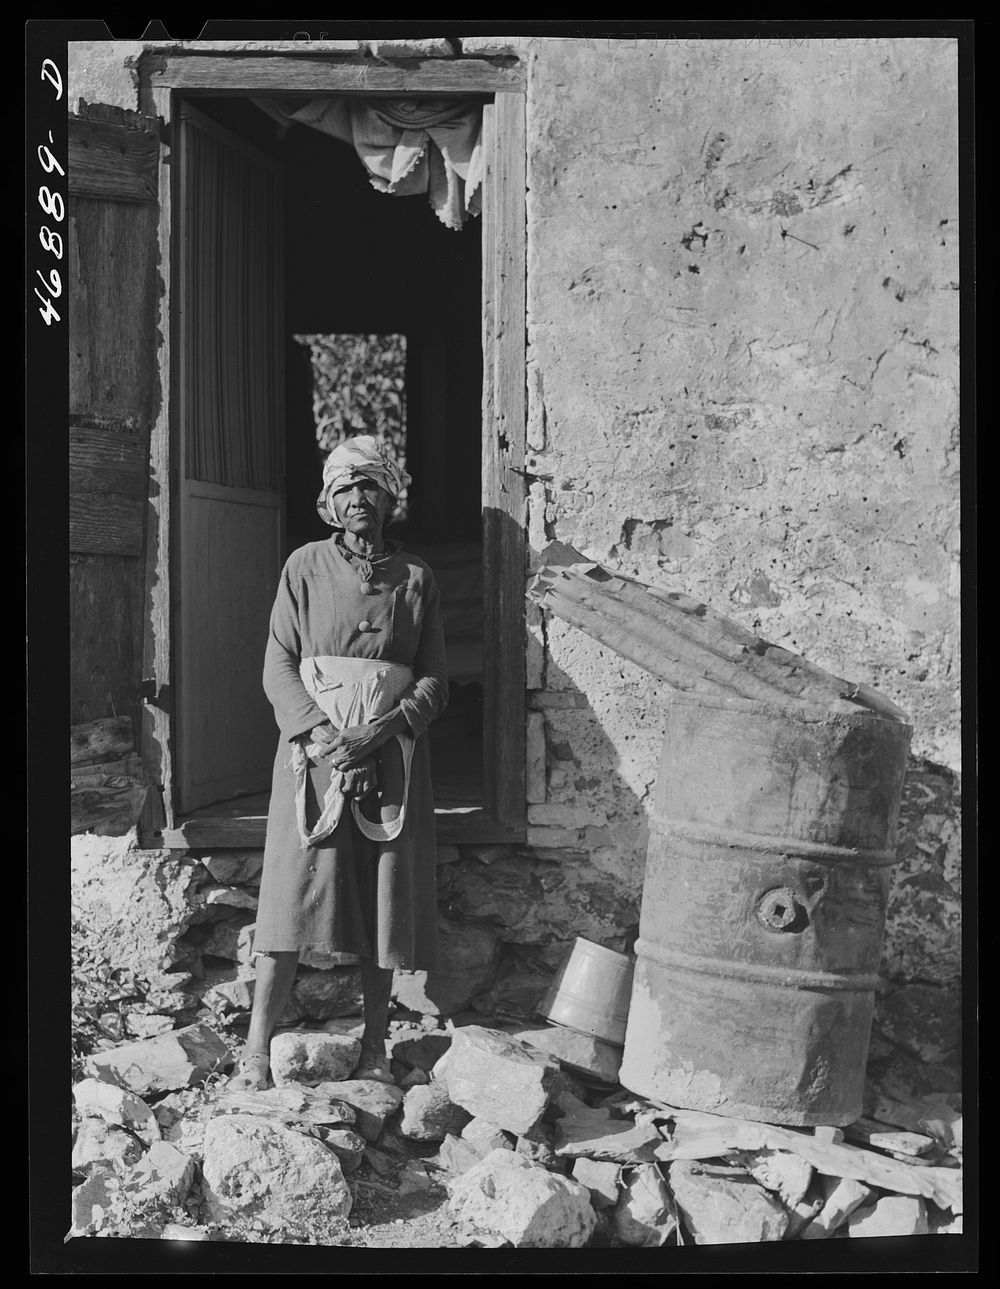 [Untitled photo, possibly related to: Saint Croix Island, Virgin Islands. FSA (Farm Security Administration) borrower who…